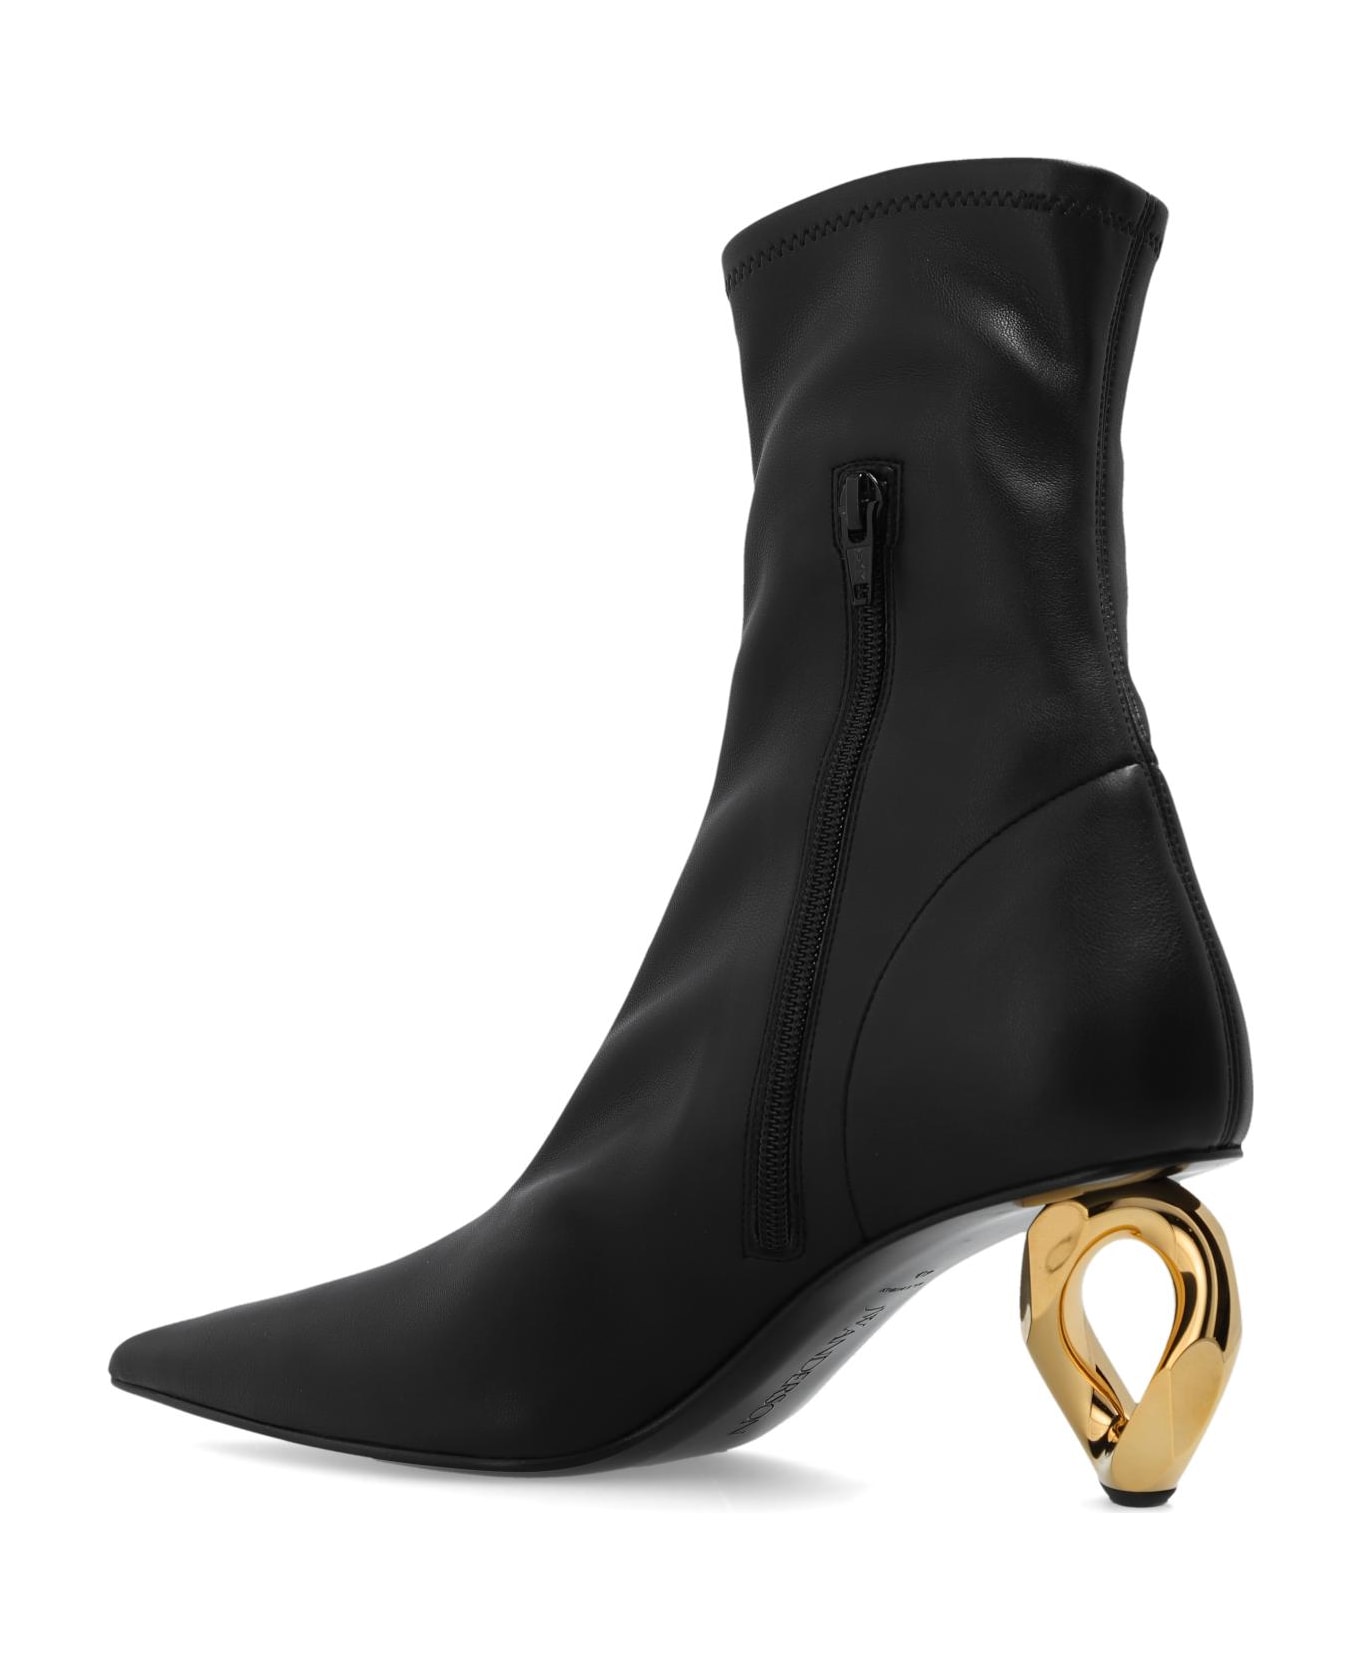 J.W. Anderson Heeled Ankle Boots - Black